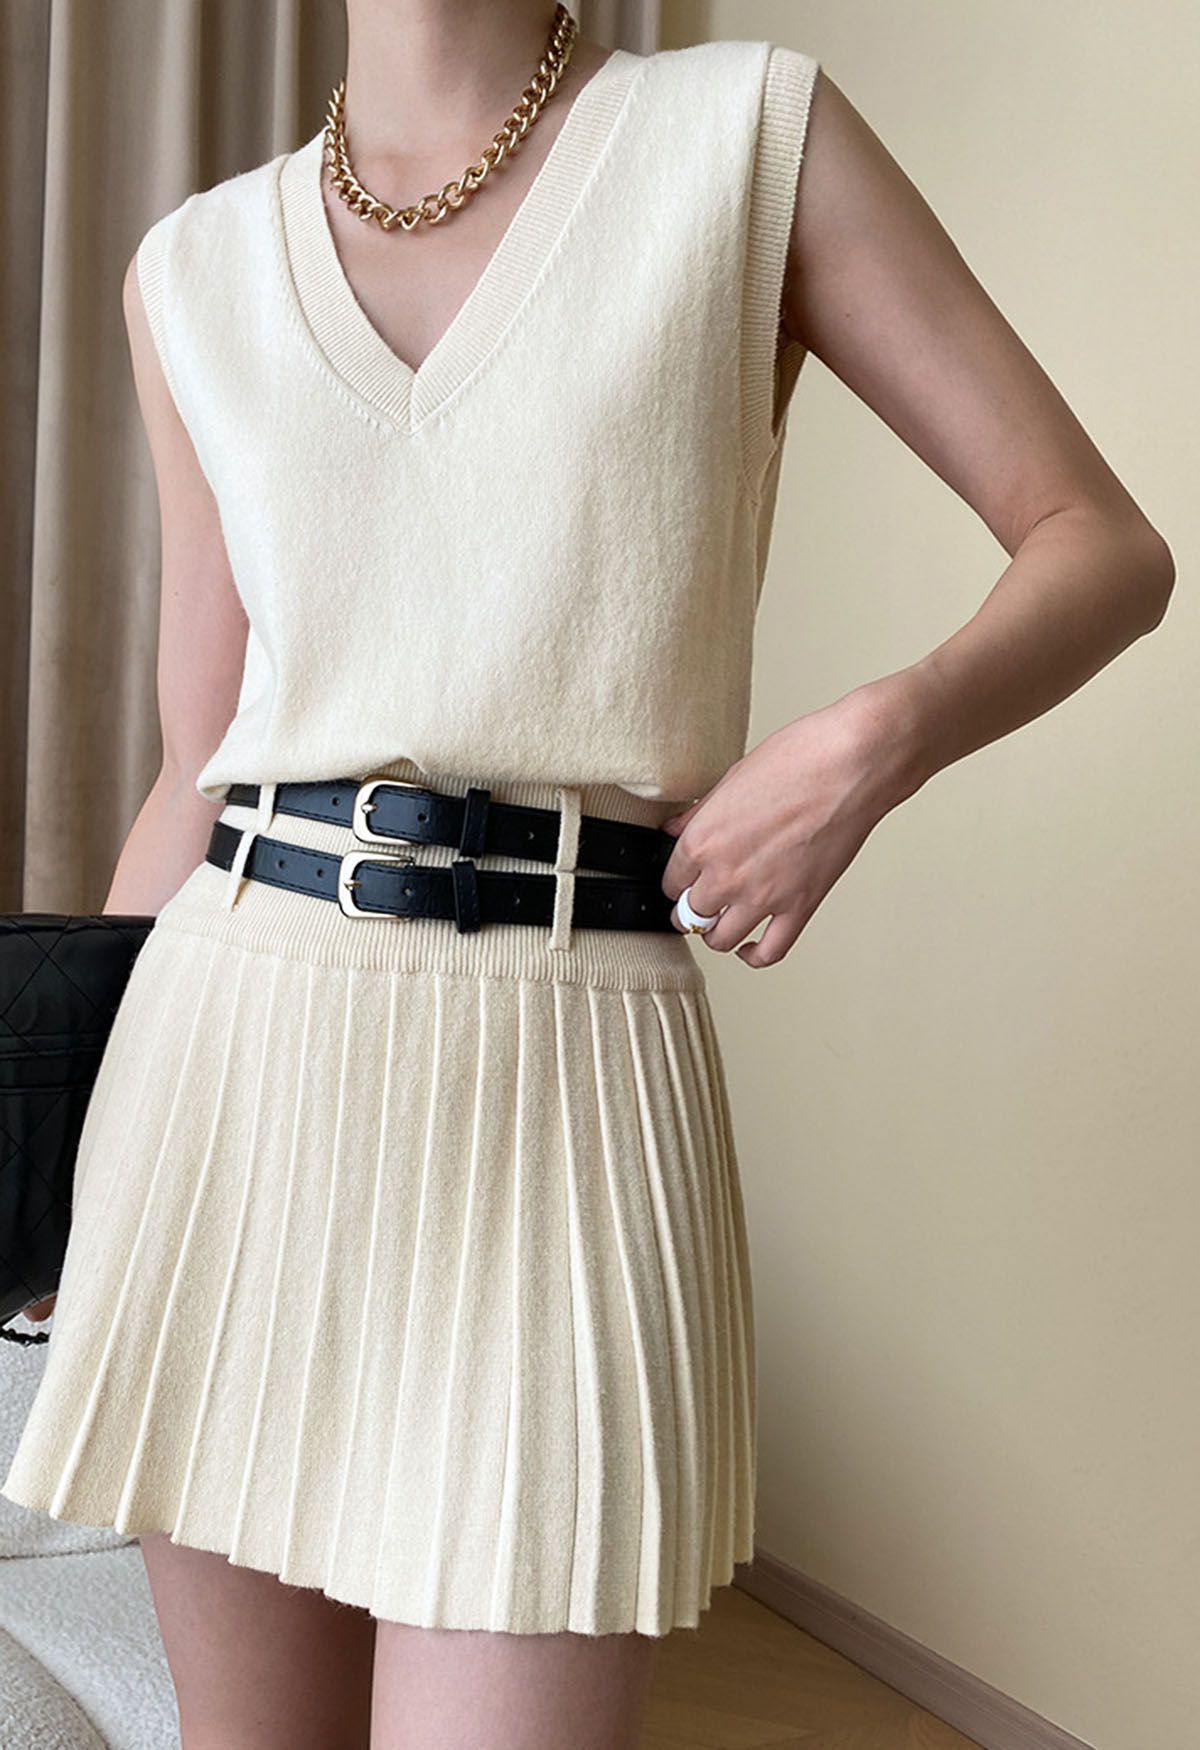 V-Neck Sleeveless Knit Top and Pleated Skirt Set in Cream | Chicwish